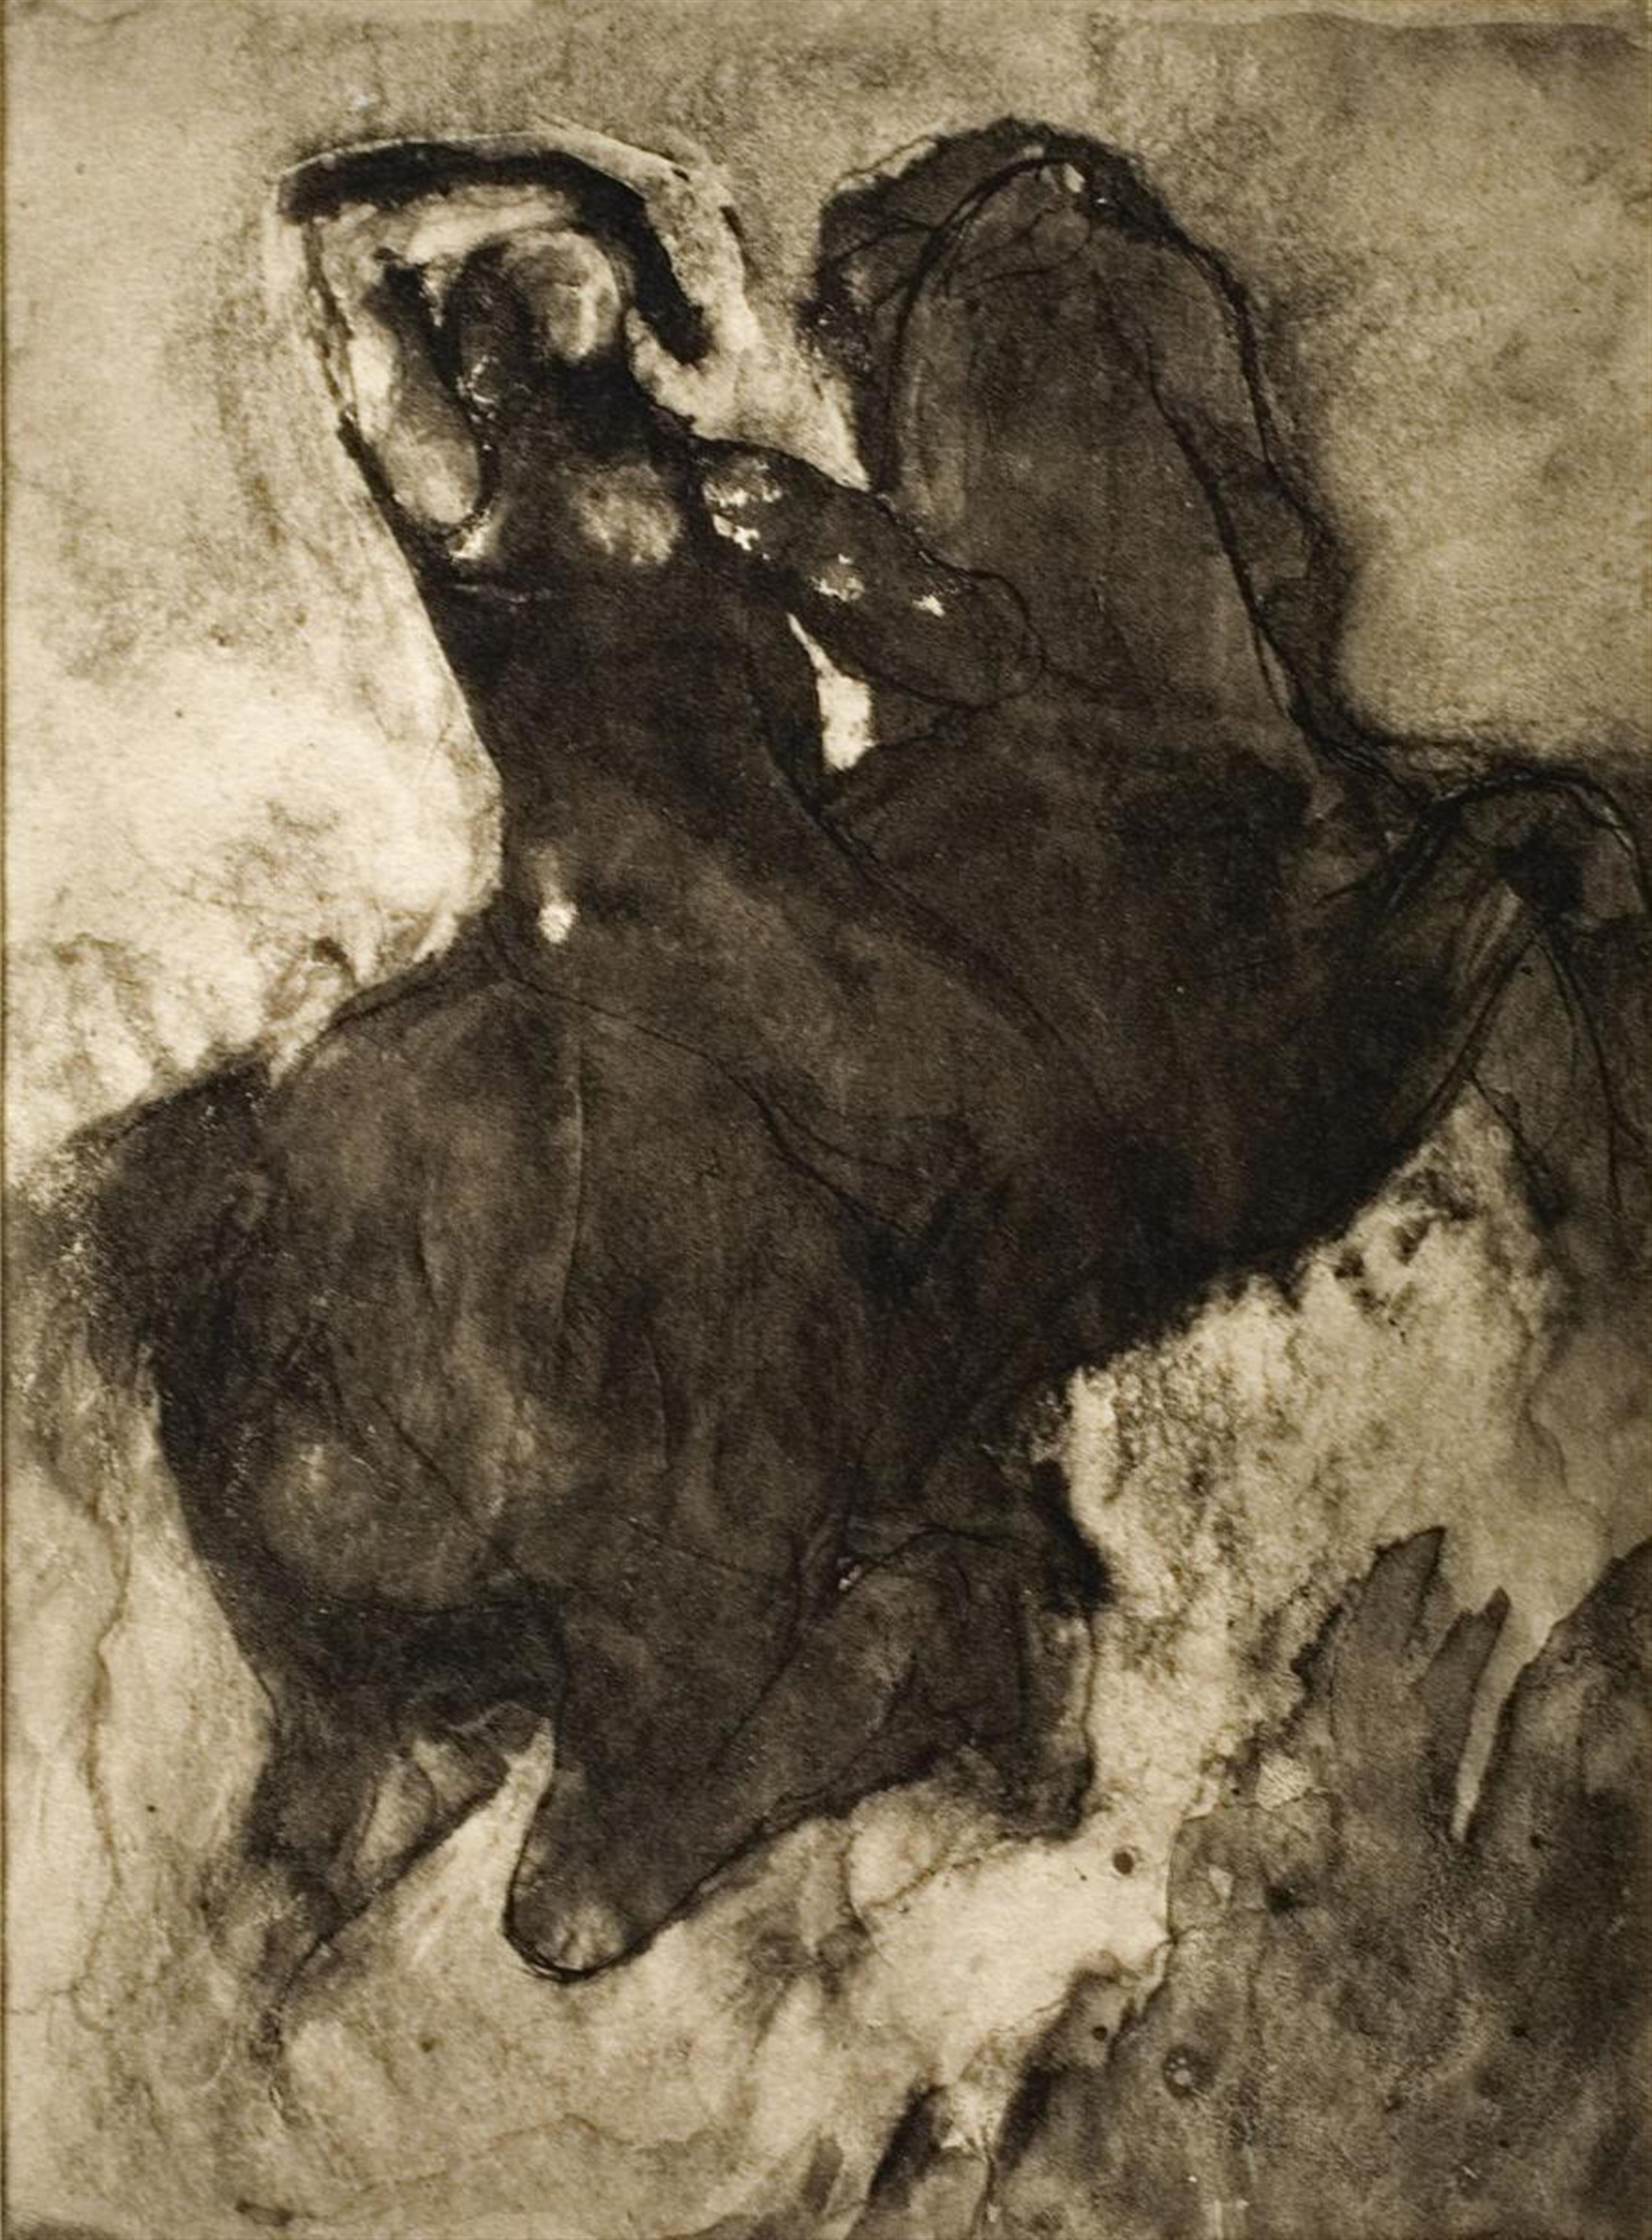 Auguste Rodin - PHOTOGRAVURE OF DRAWING. PHOTOGRAVURE OF DRAWING. CAMBODIAN DANCER. DRAWING (SUN SERIES). DRAWING (SUN SERIES). DRAWING. - image-1